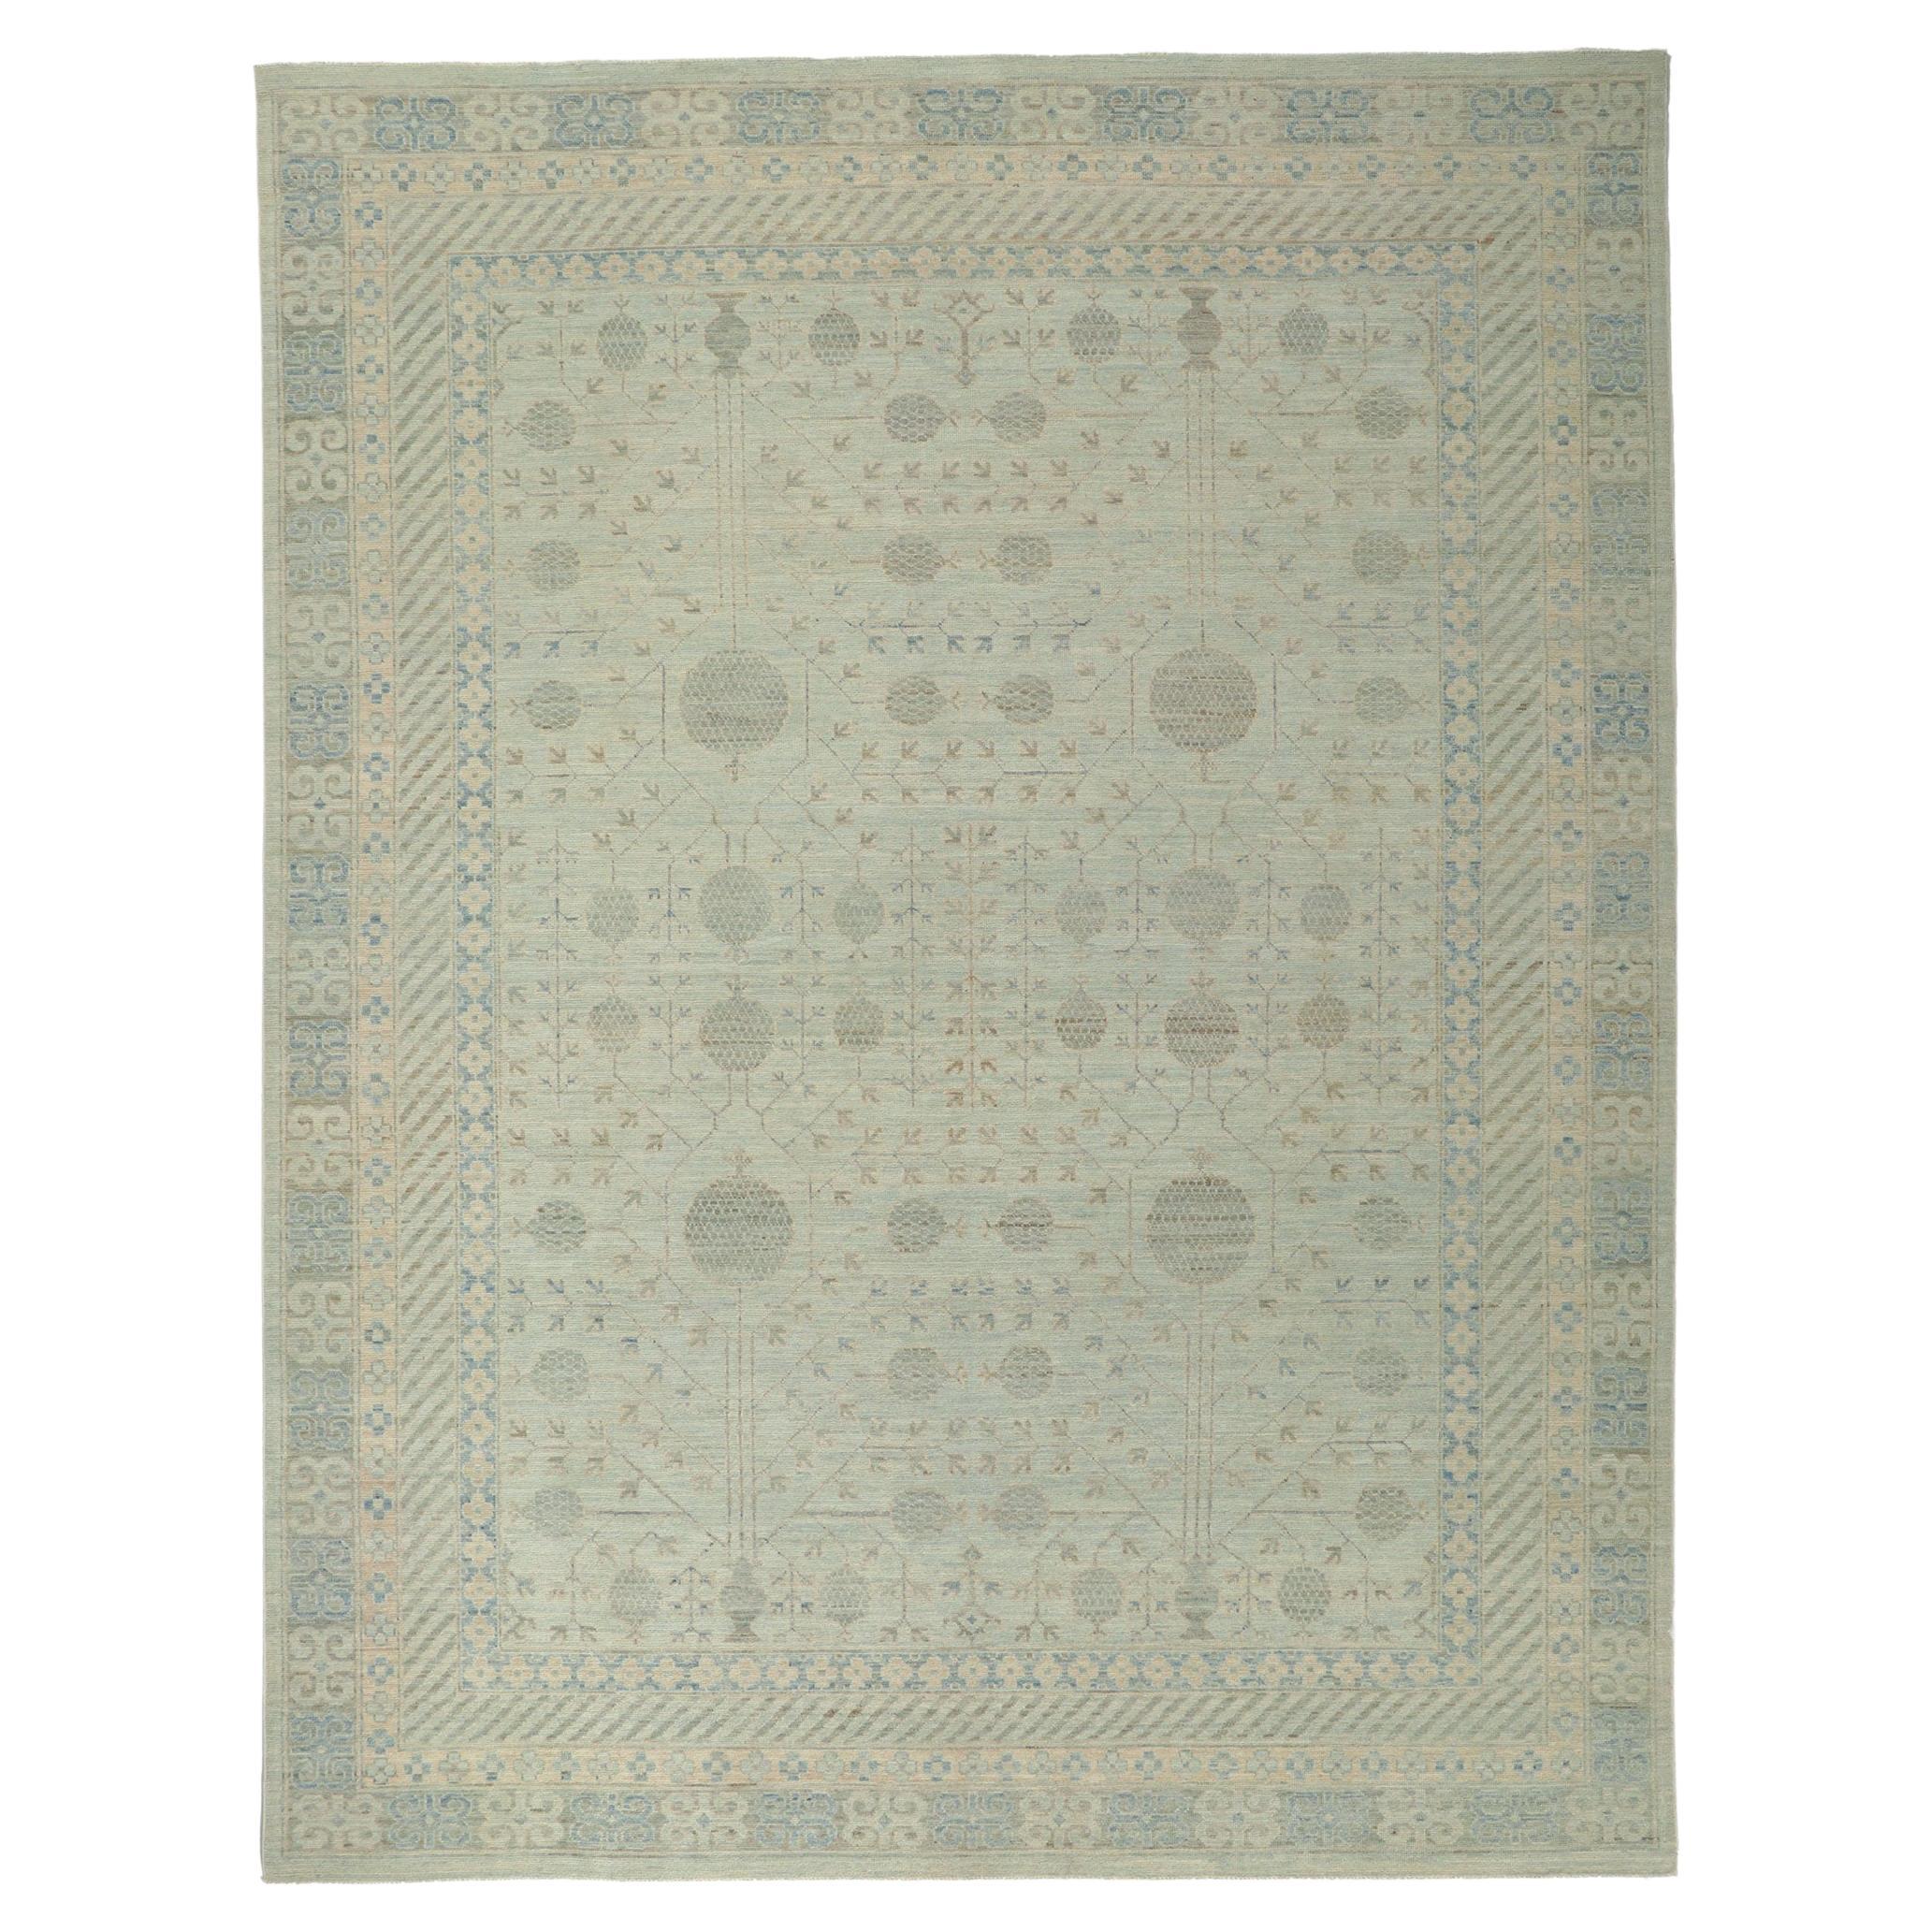 New Contemporary Transitional Khotan Rug with Colonial Revival Style ...